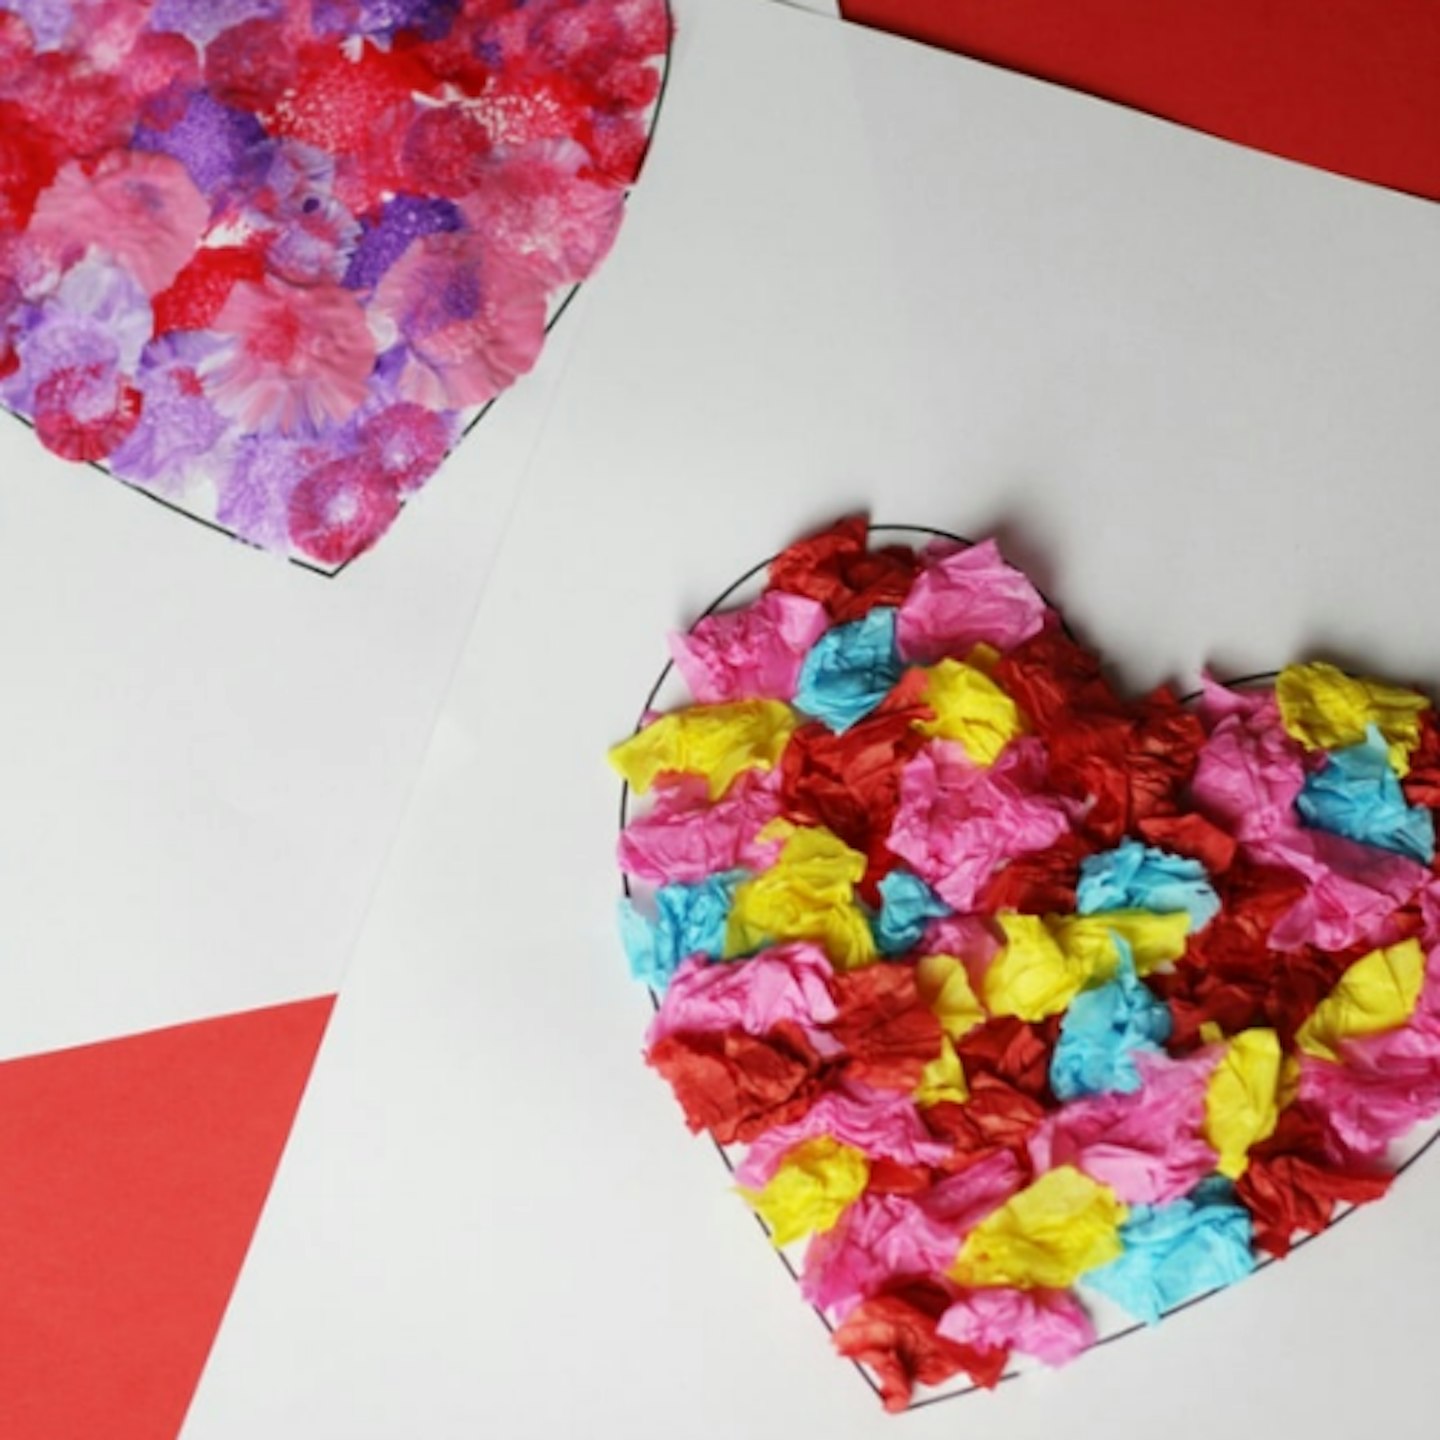 10 Pipe Cleaner Crafts for Valentine's day - Twitchetts